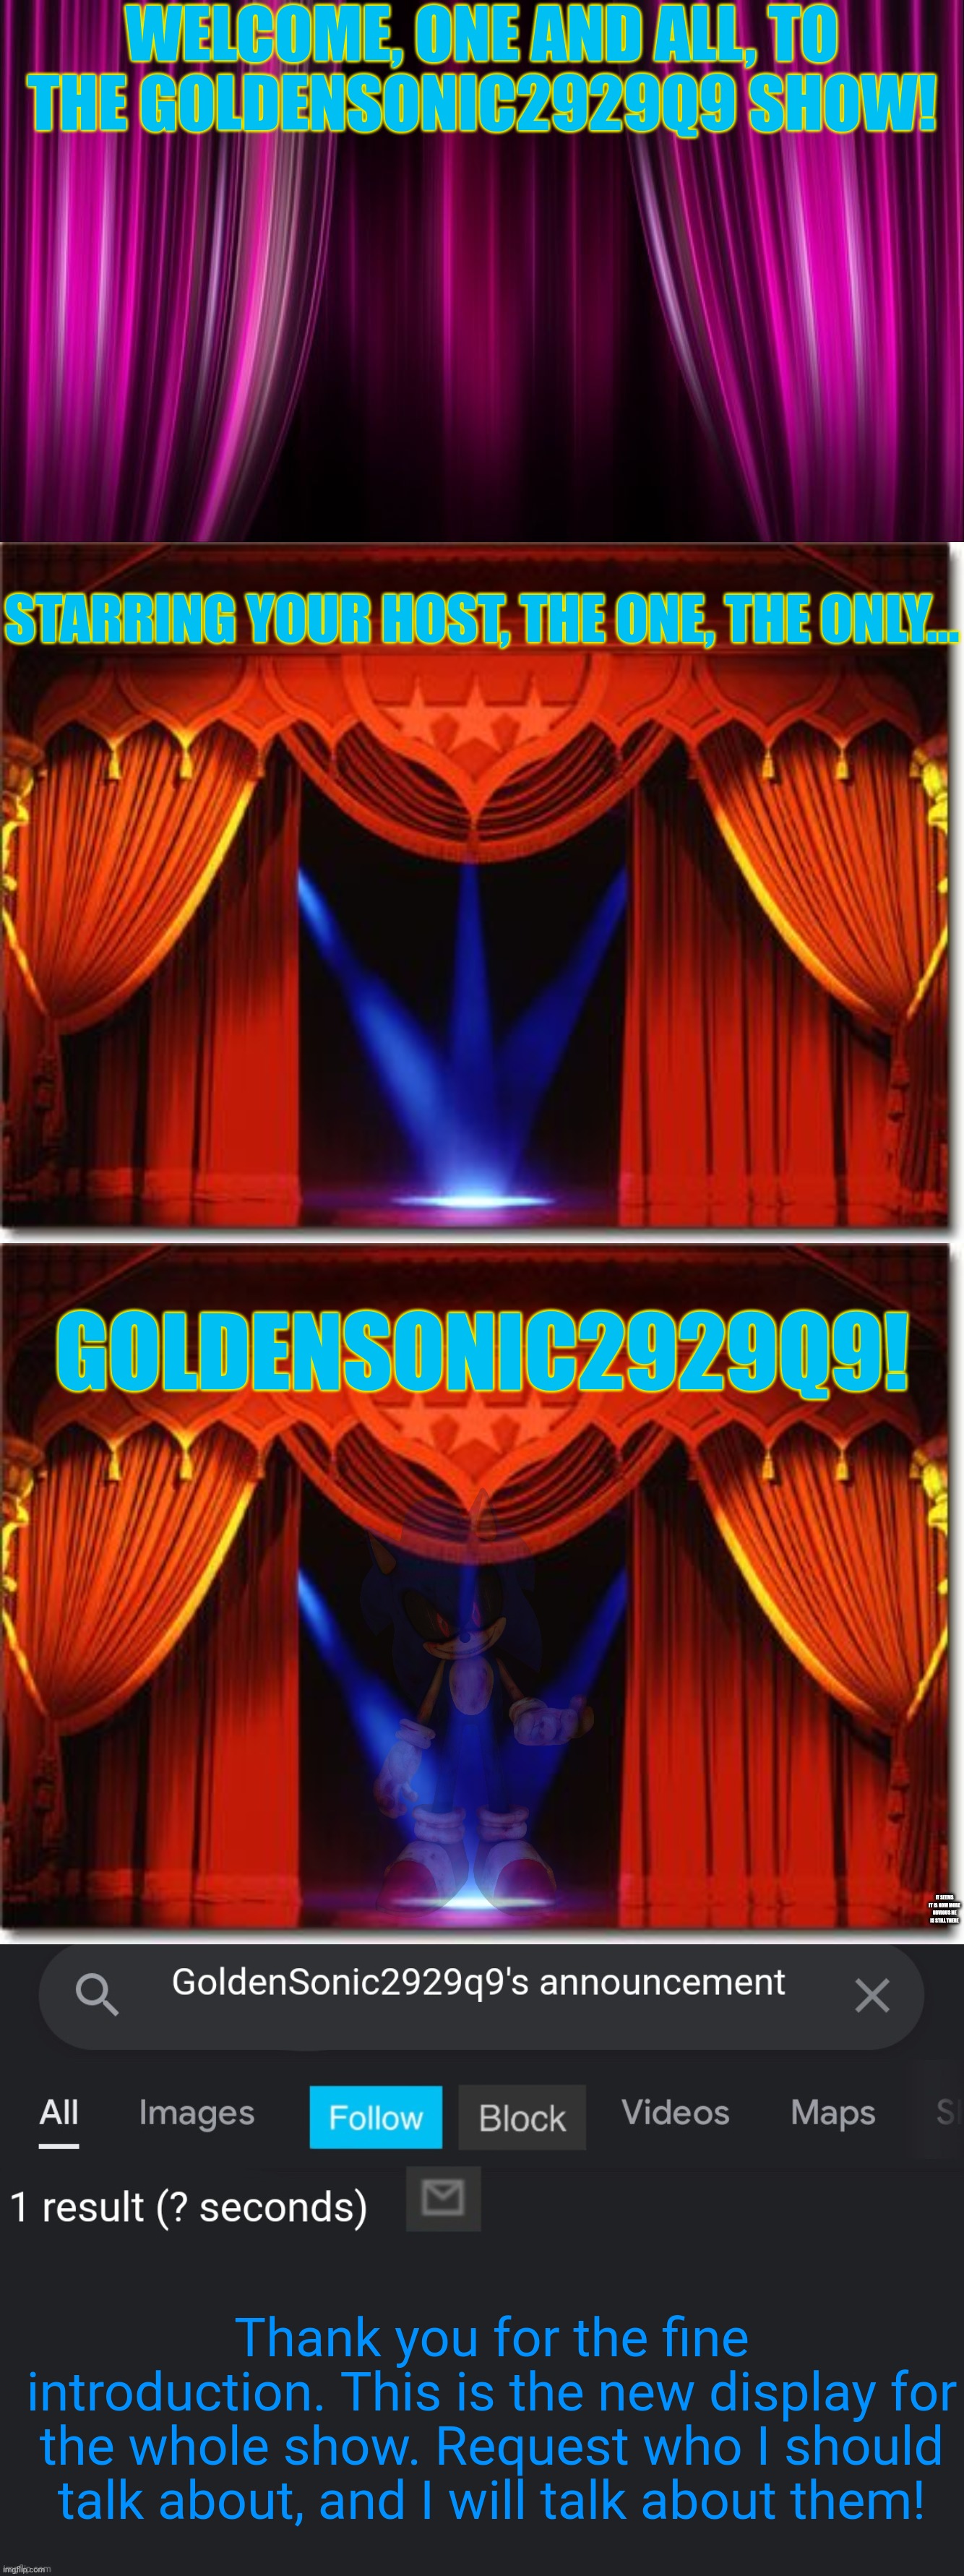 The GoldenSonic2929q9 Show! | WELCOME, ONE AND ALL, TO THE GOLDENSONIC2929Q9 SHOW! STARRING YOUR HOST, THE ONE, THE ONLY... GOLDENSONIC2929Q9! IT SEEMS IT IS NOW MORE OBVIOUS HE IS STILL THERE; Thank you for the fine introduction. This is the new display for the whole show. Request who I should talk about, and I will talk about them! | image tagged in pink curtain background,stage curtains,goldensonic2929q9's internet announcement template | made w/ Imgflip meme maker